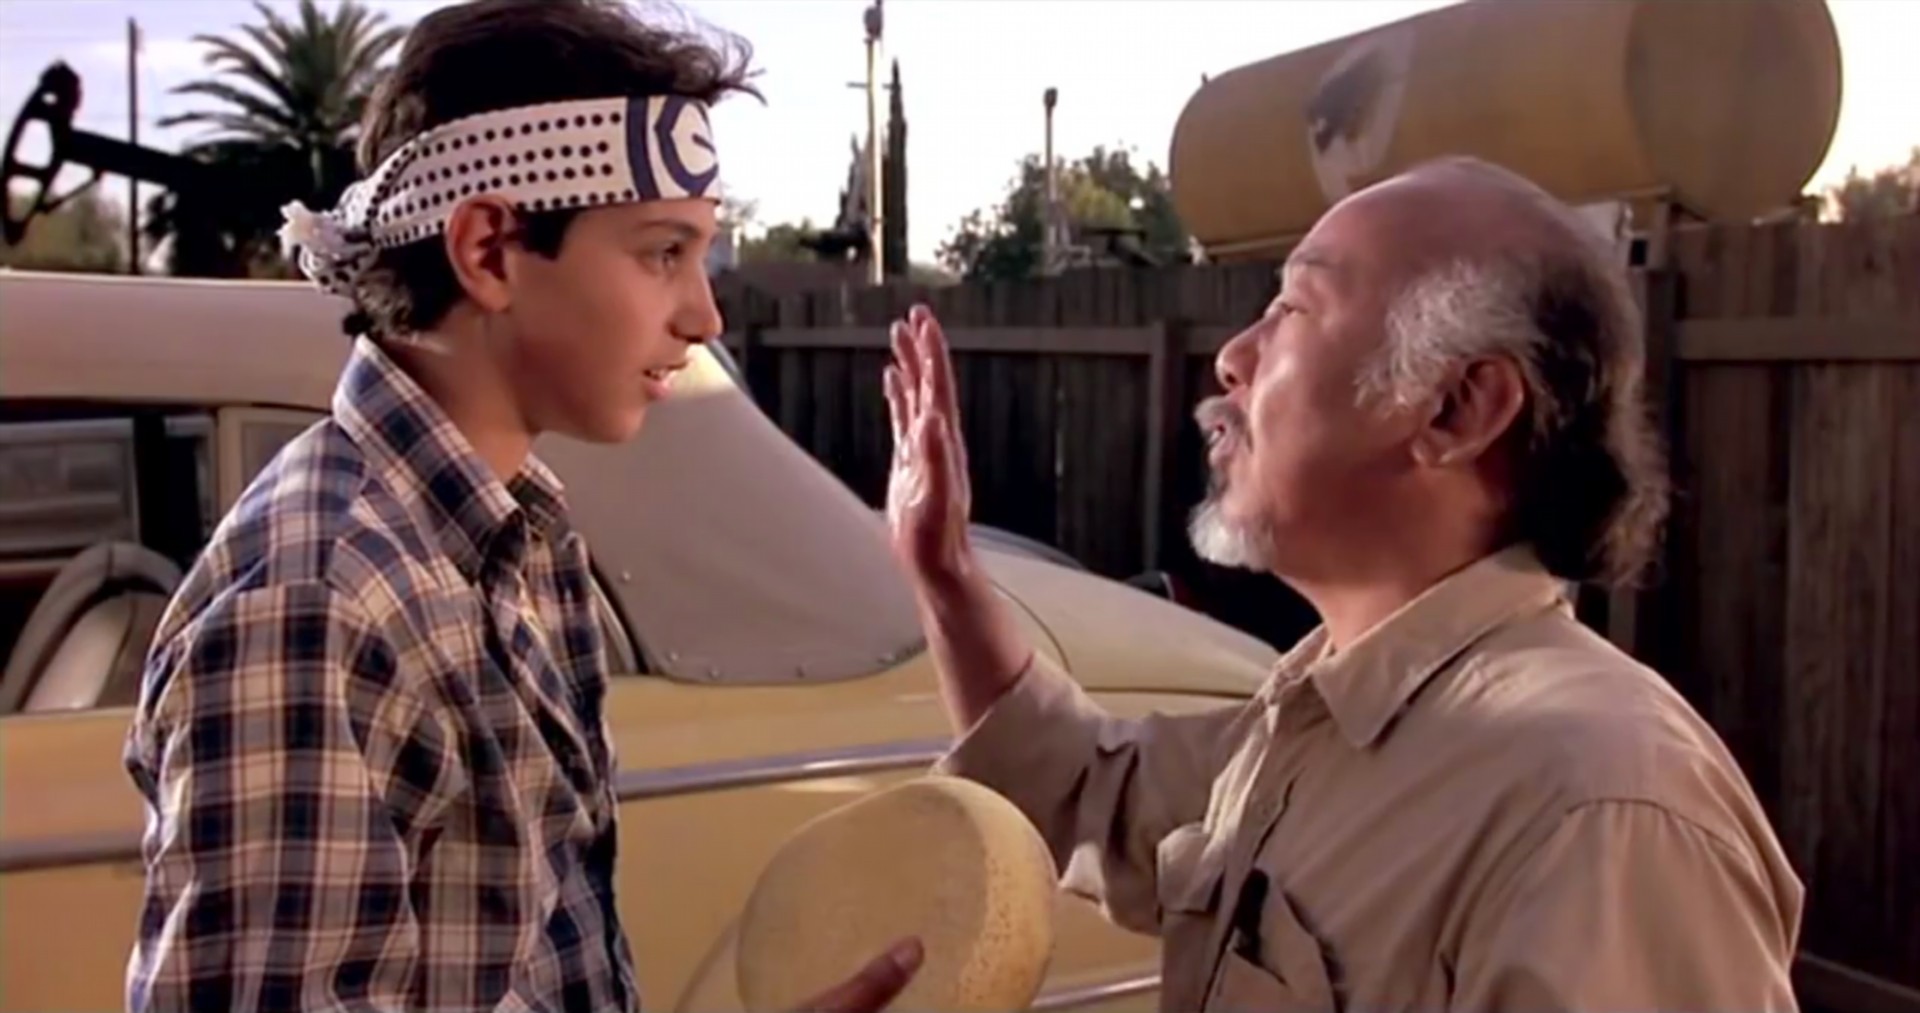 Pat Morita was 51 then, and Ralph Macchio is 54 years old now.